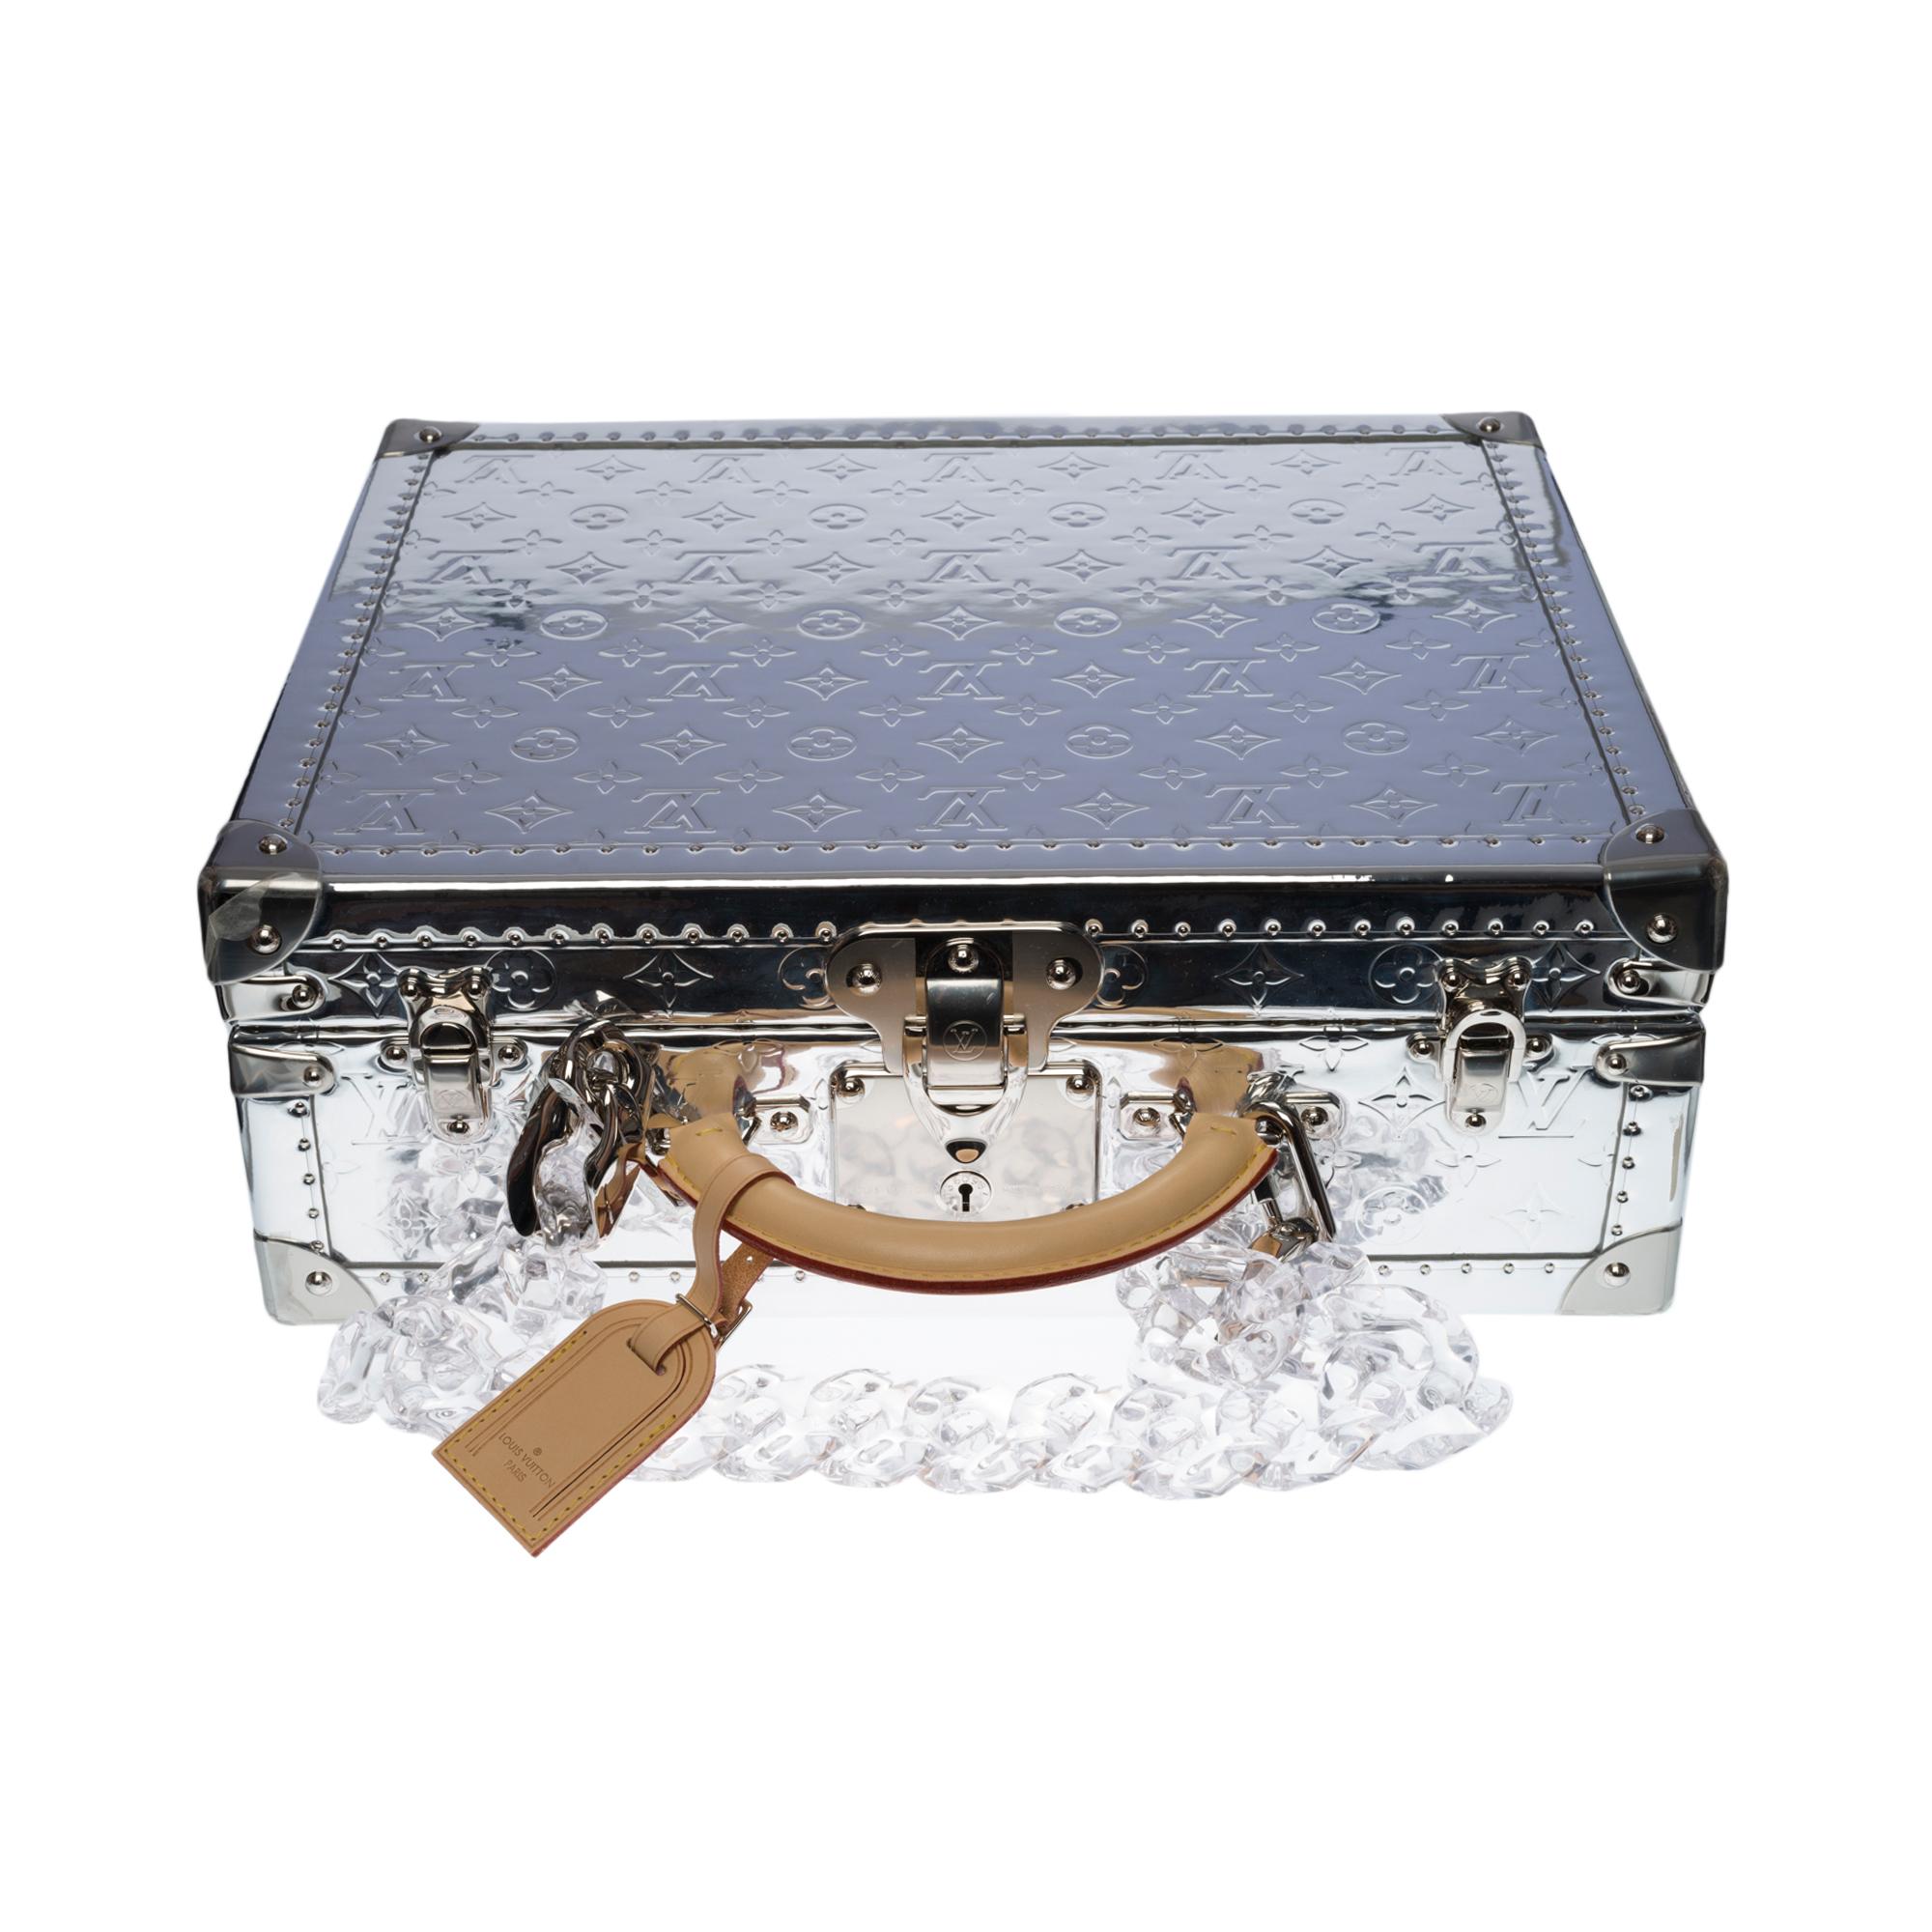 Ultra Rare - Unique Piece- Fashion Shows 2021 - Virgil Abloh

The Cotteville Historical Suitcase has been revisited on the occasion of the 2021 shows by Virgil Abloh in his silver Monogram Mirror dress

Dimensions:
40 x 33 x 15 cm / 15.74 x 12.99 x